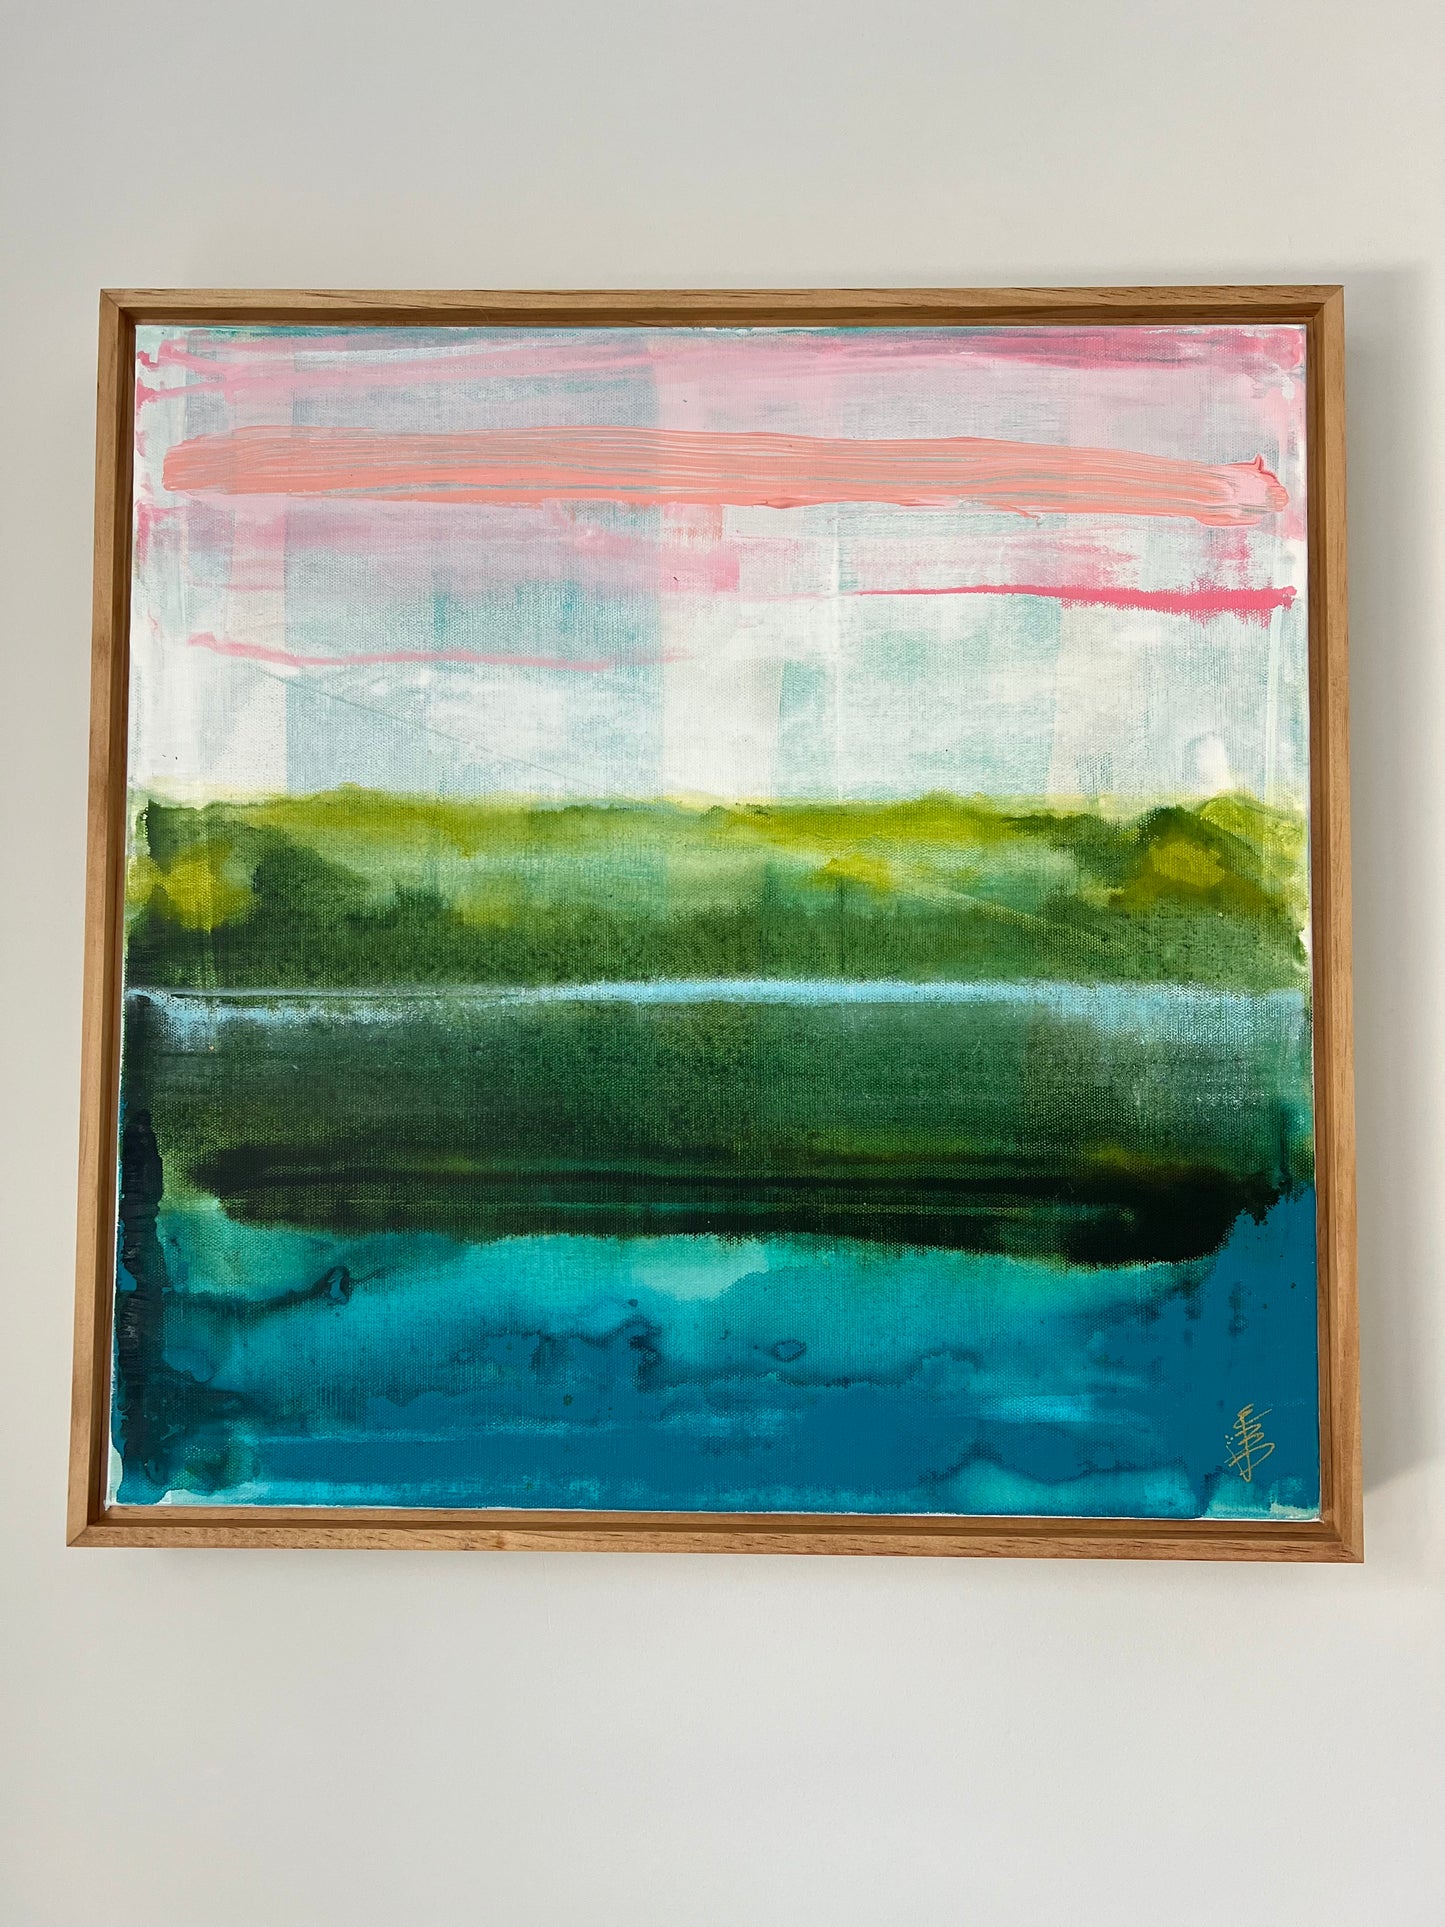 Where water meets land, 20x20